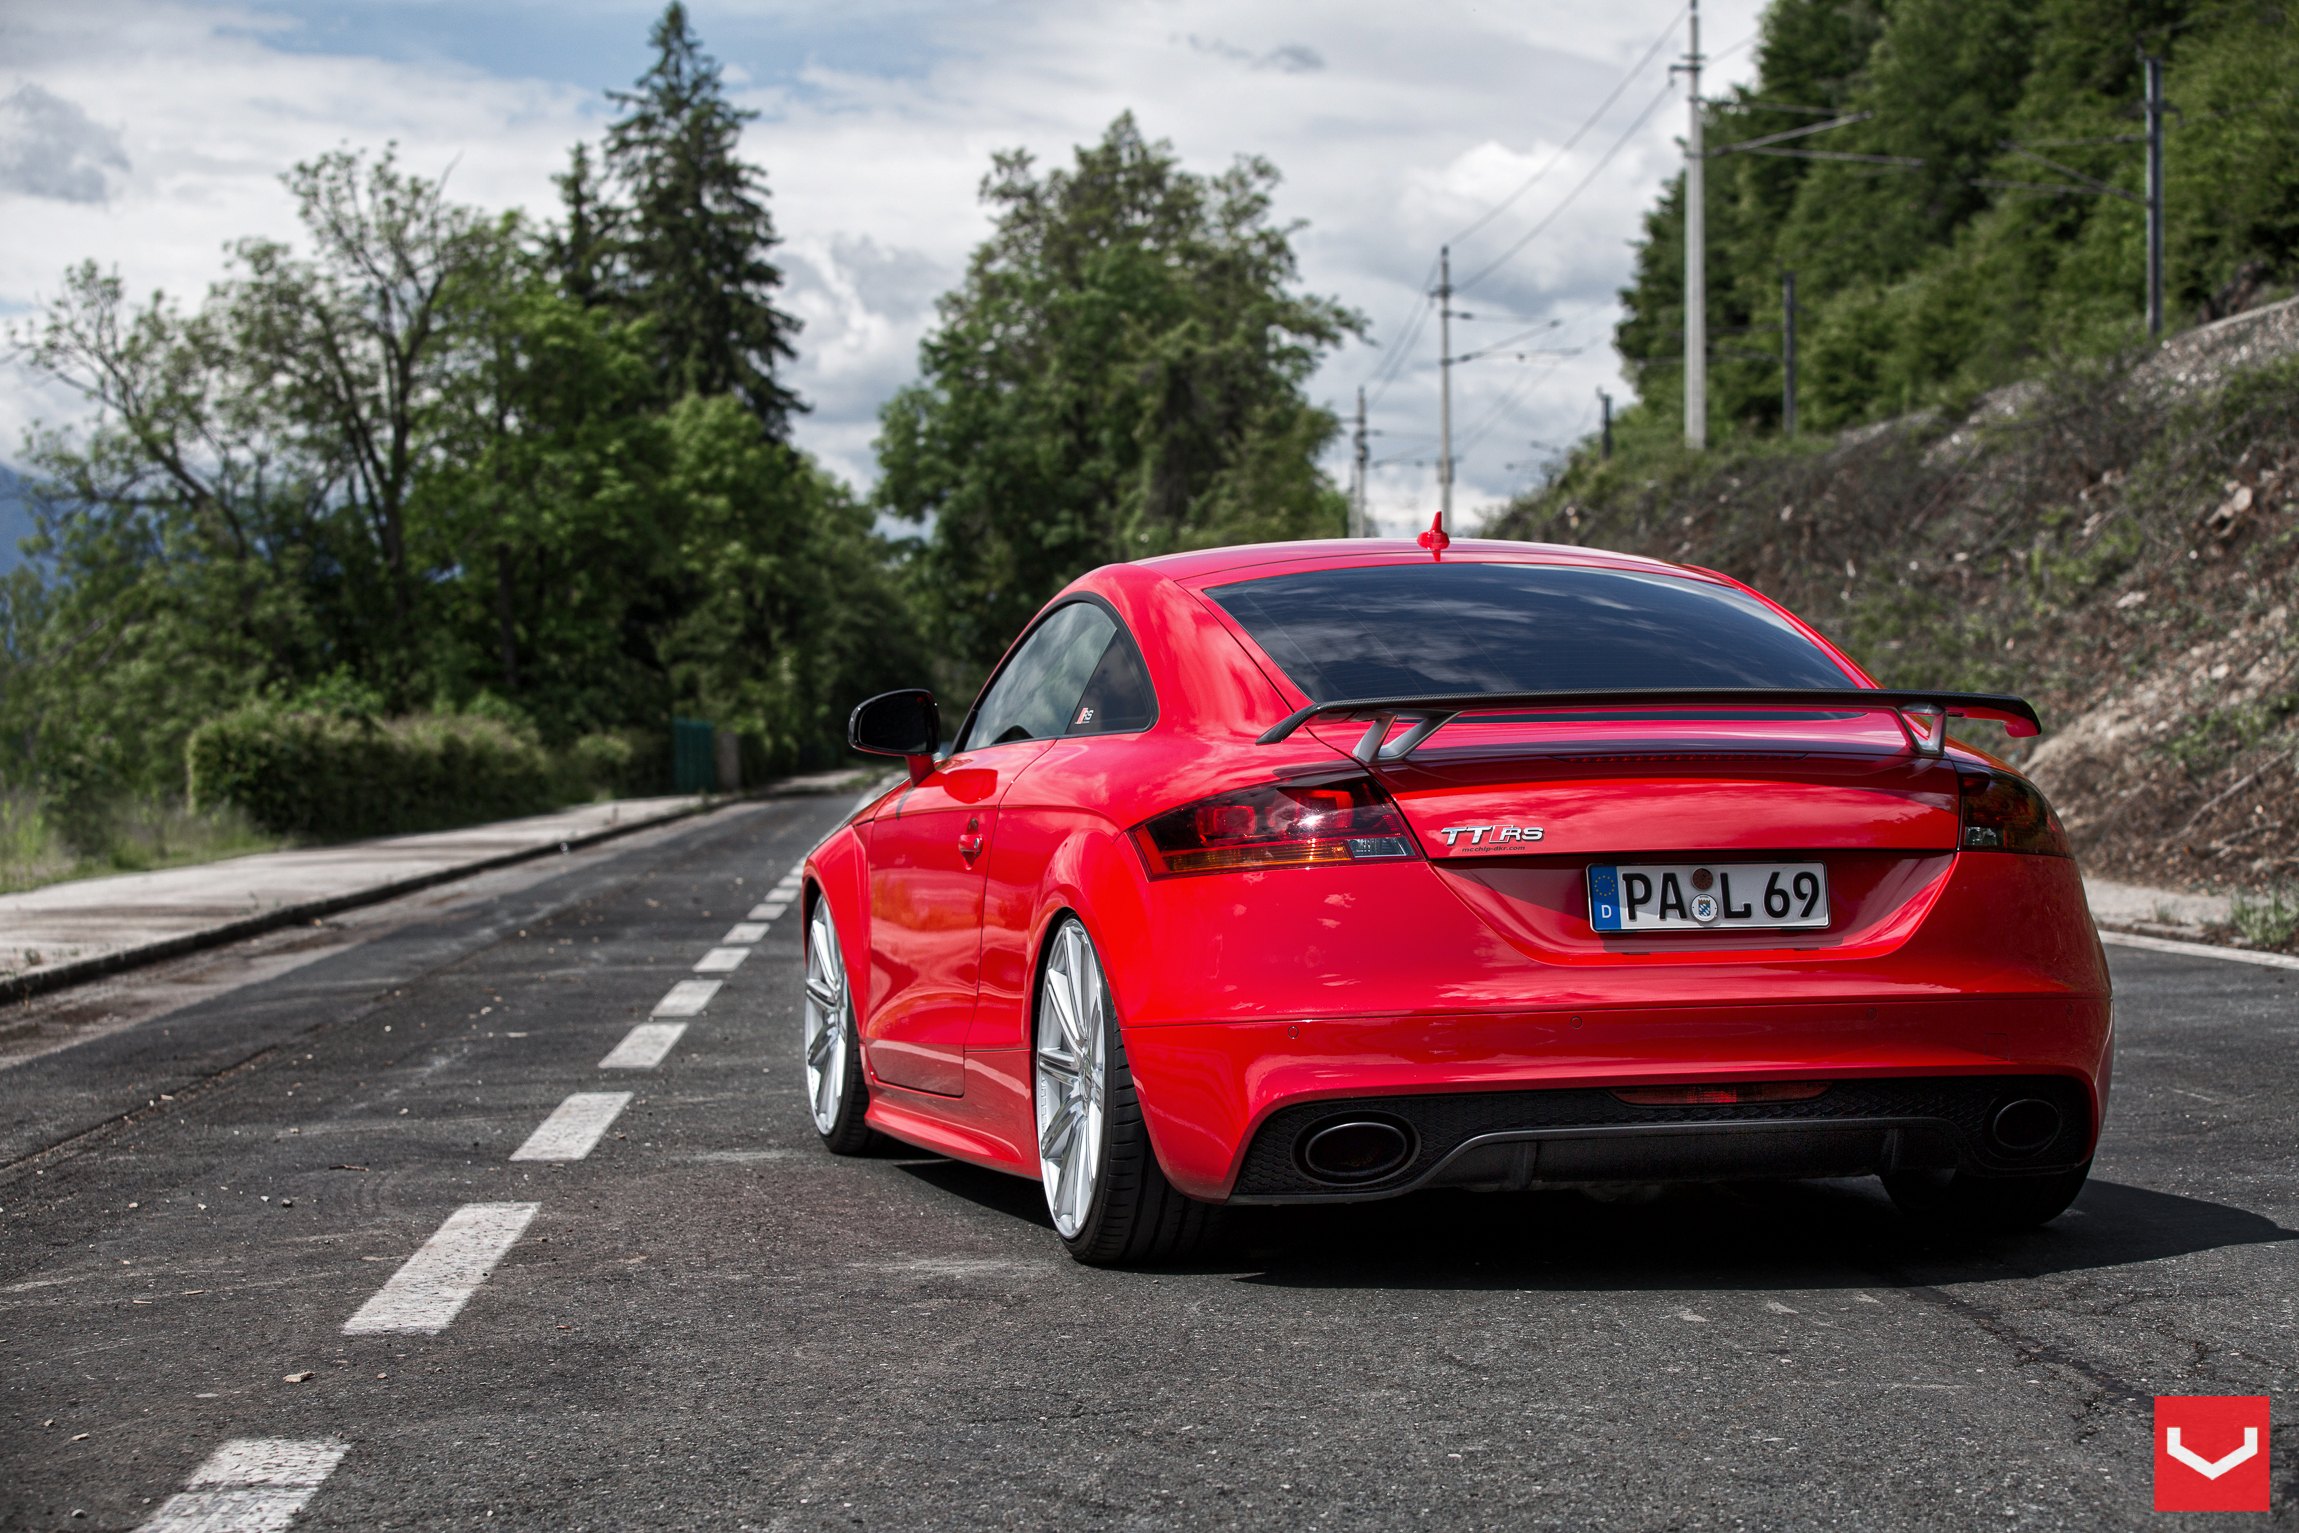 Racing Inspired Tuning for Red Audi TT — CARiD.com Gallery